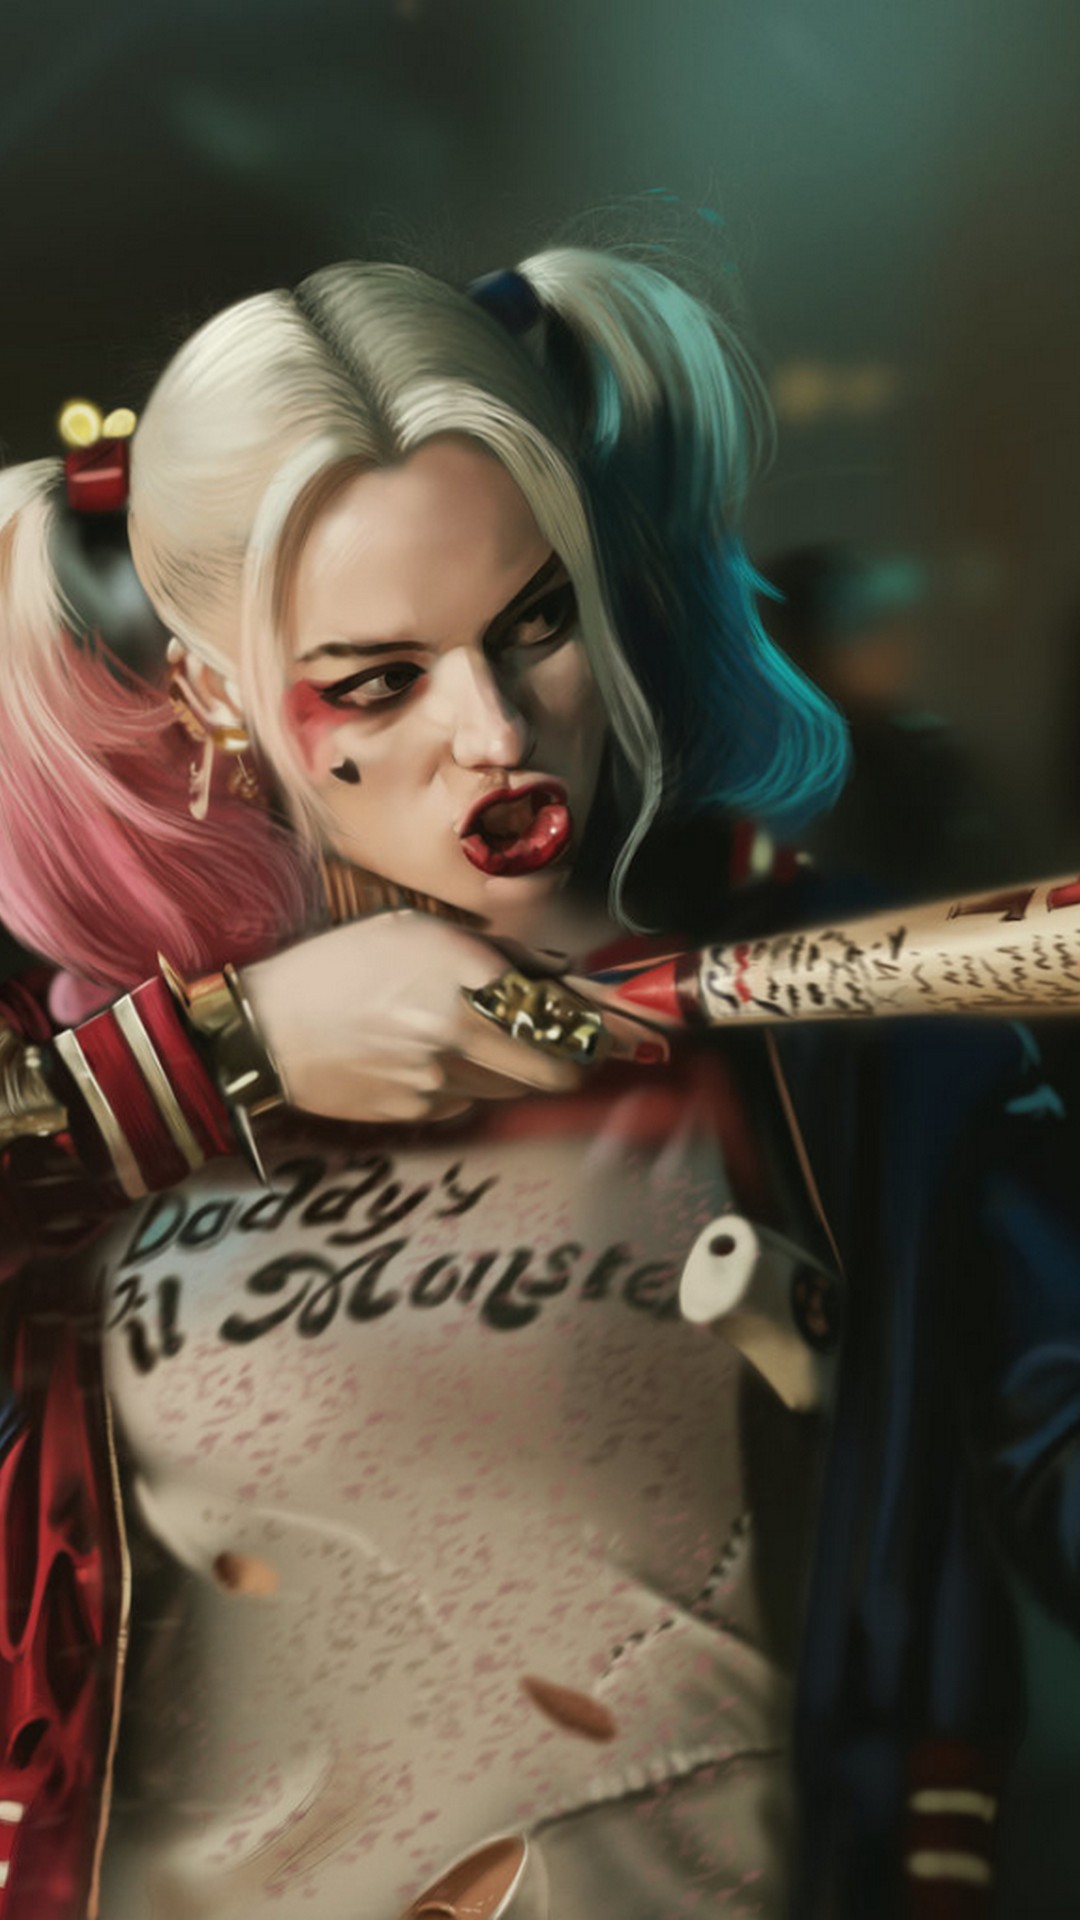 Wallpaper Harley Quinn Makeup iPhone with resolution 1080X1920 pixel. You can make this wallpaper for your iPhone 5, 6, 7, 8, X backgrounds, Mobile Screensaver, or iPad Lock Screen